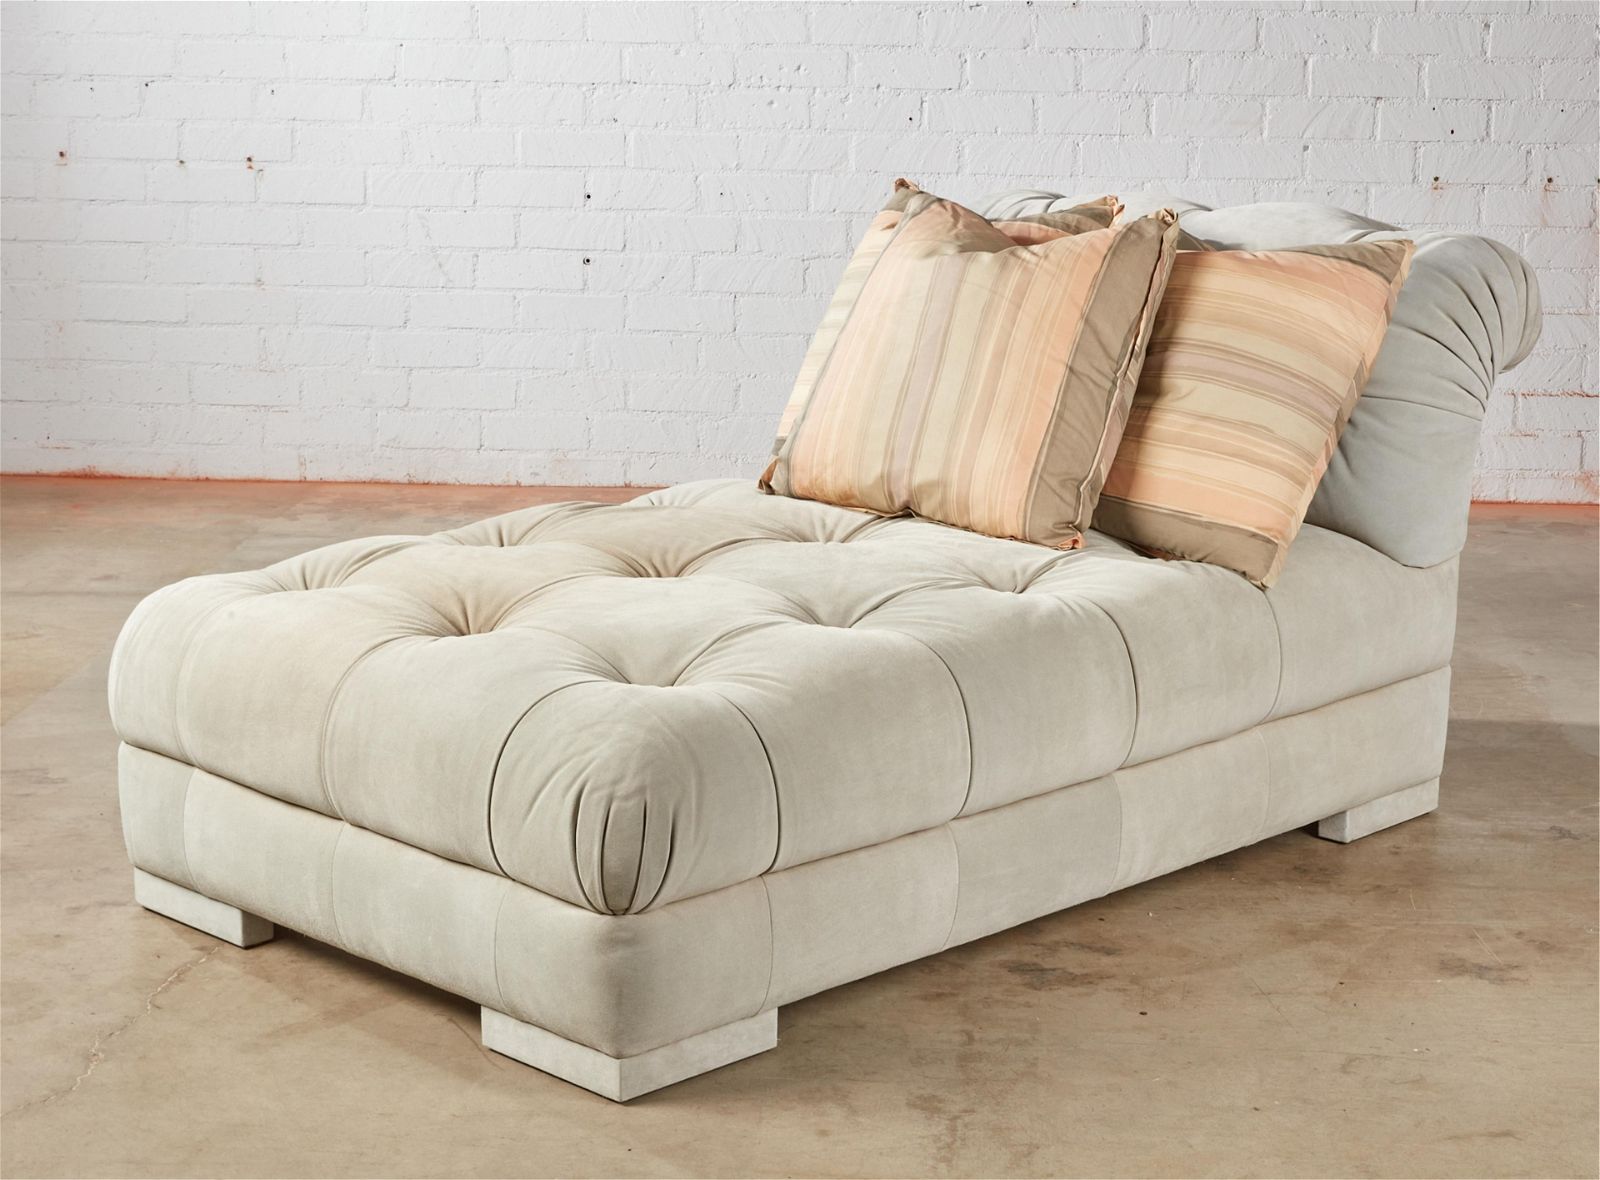 A CONTEMPORARY FULLY UPHOLSTERED 2fb43b1